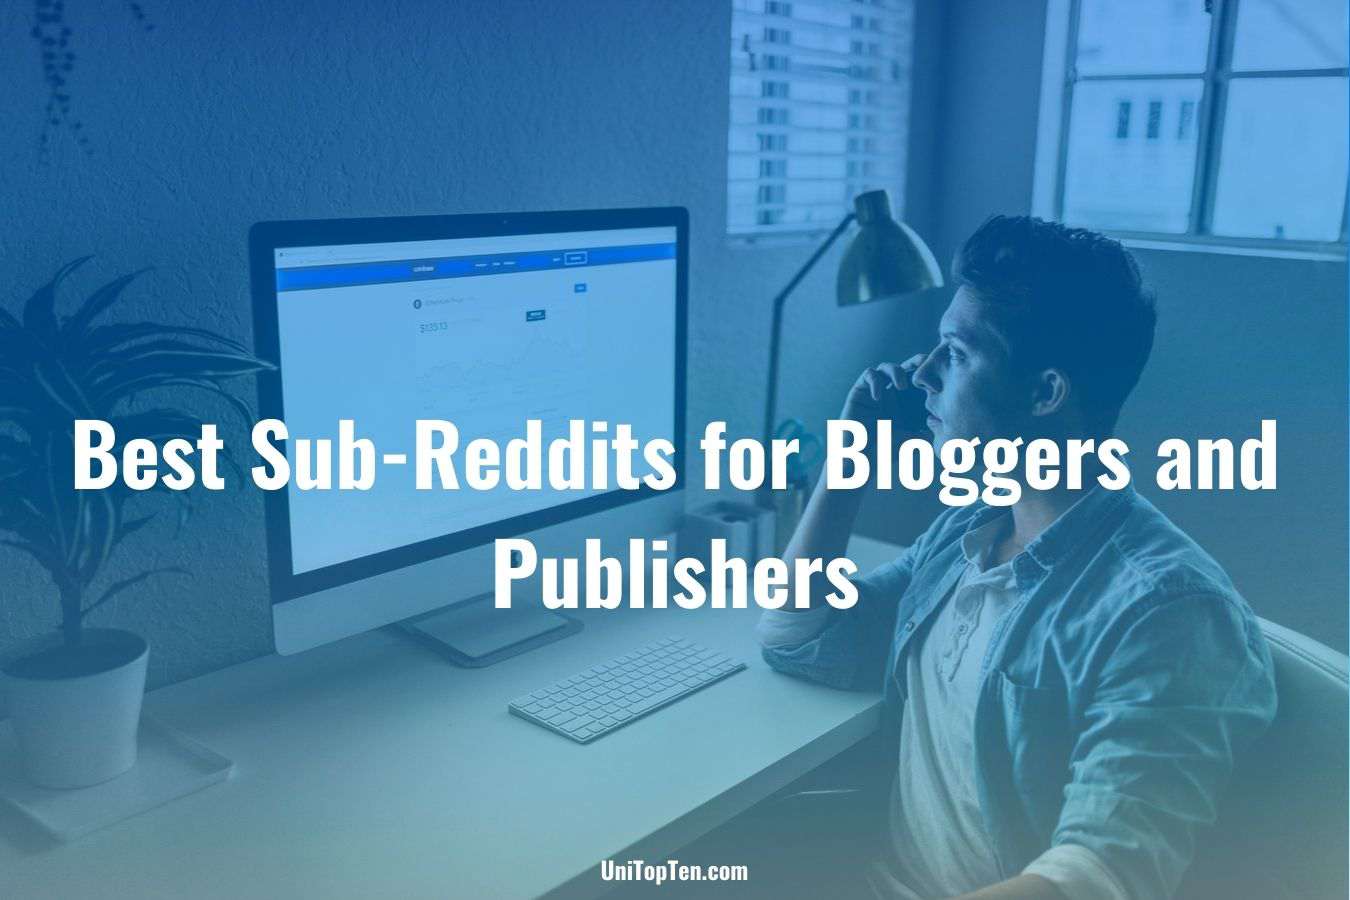 Top 10 Best Sub-Reddit for Bloggers and Publishers